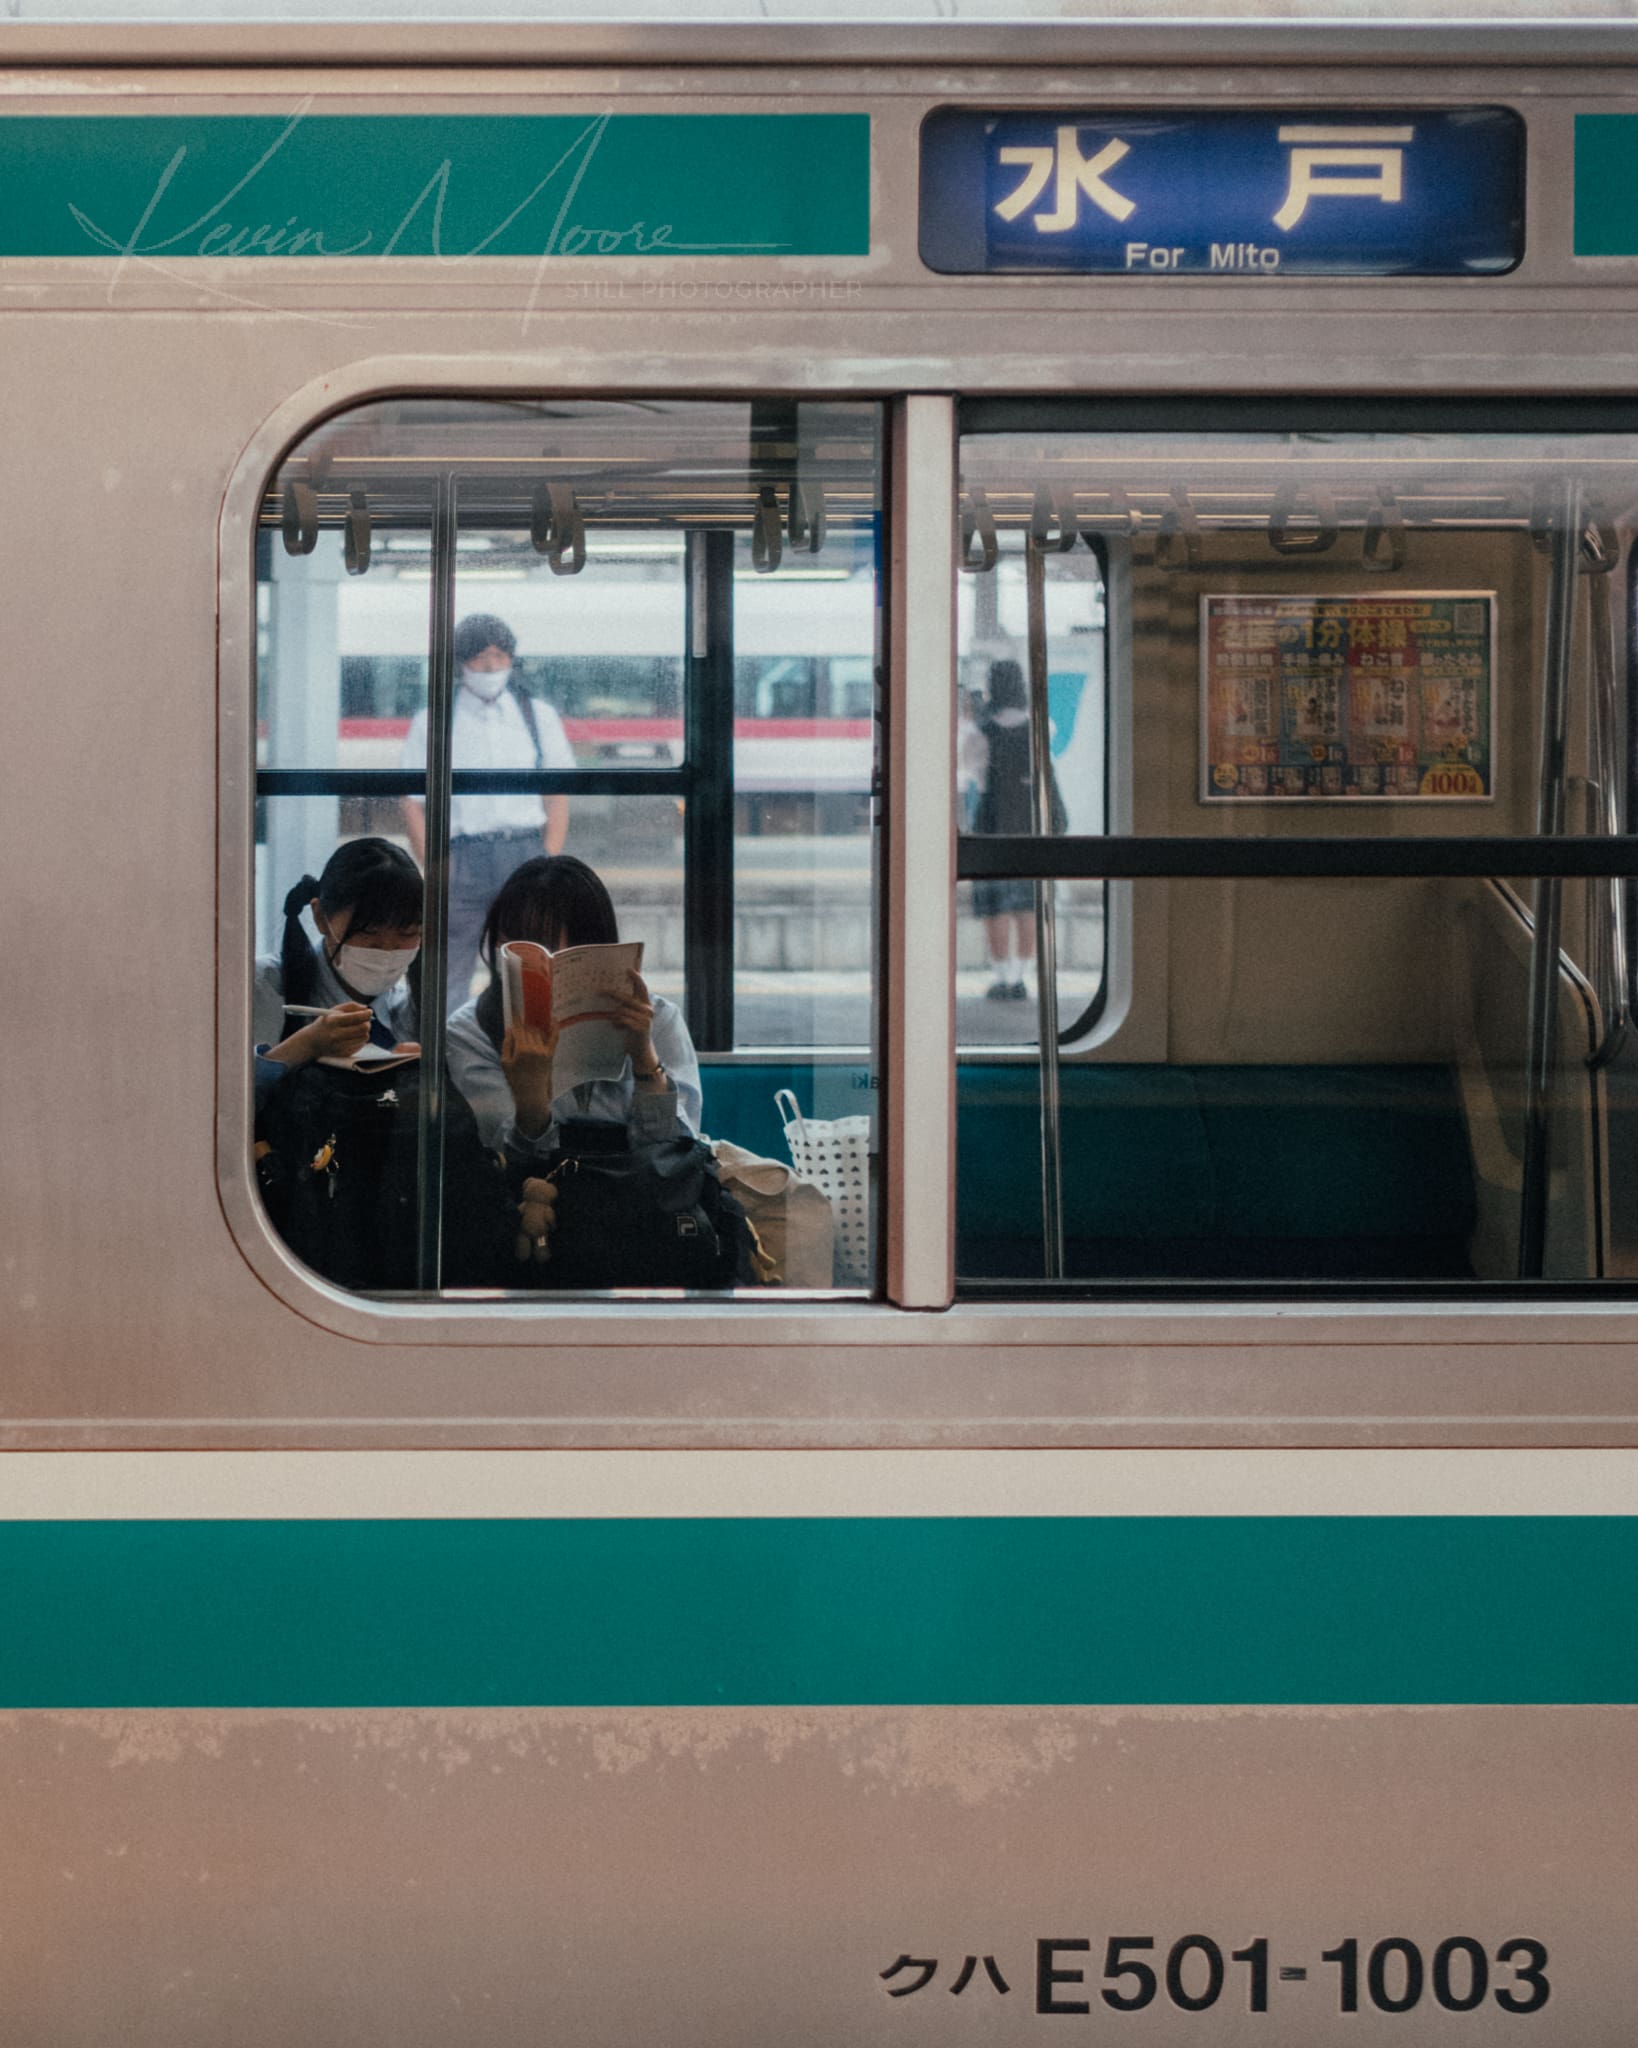 Passengers engrossed in activities inside a Japanese train heading to Mito.